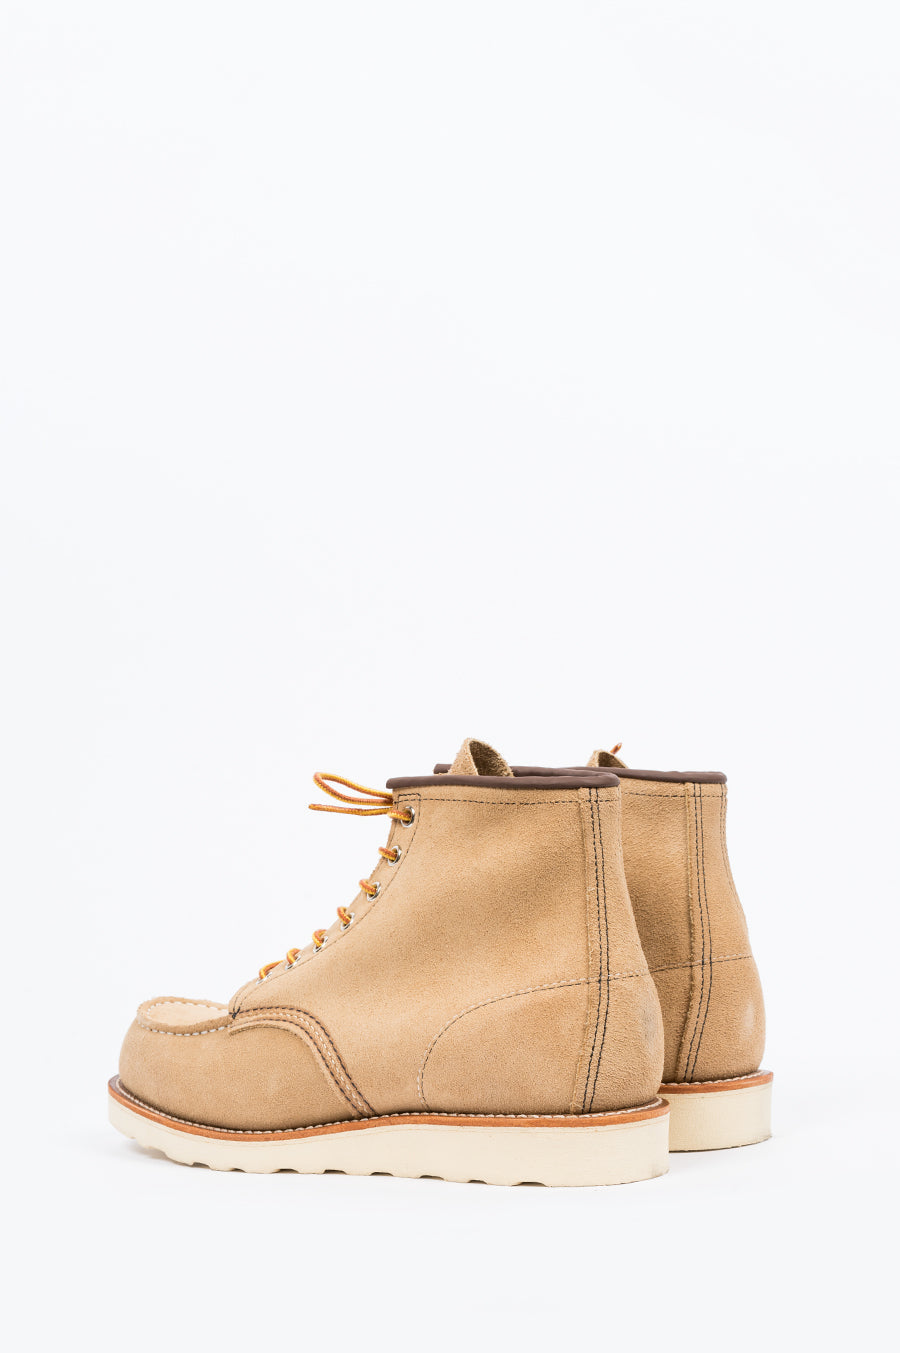 RED WING 6" BOOT CLASSIC MOC SAND - BLENDS